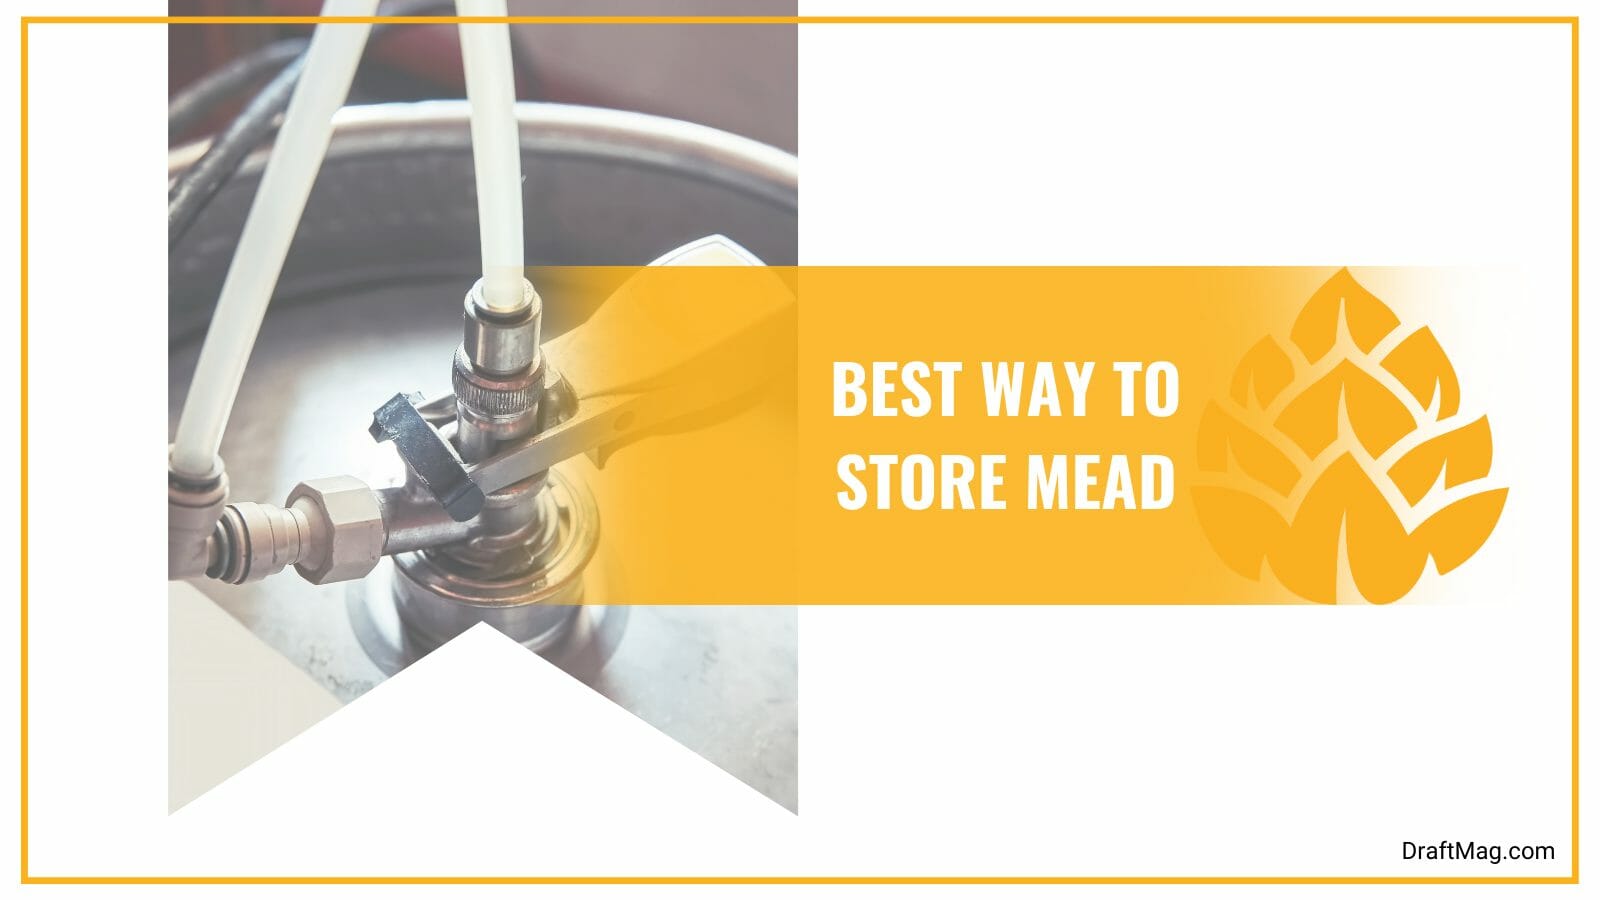 Storing Mead Properly